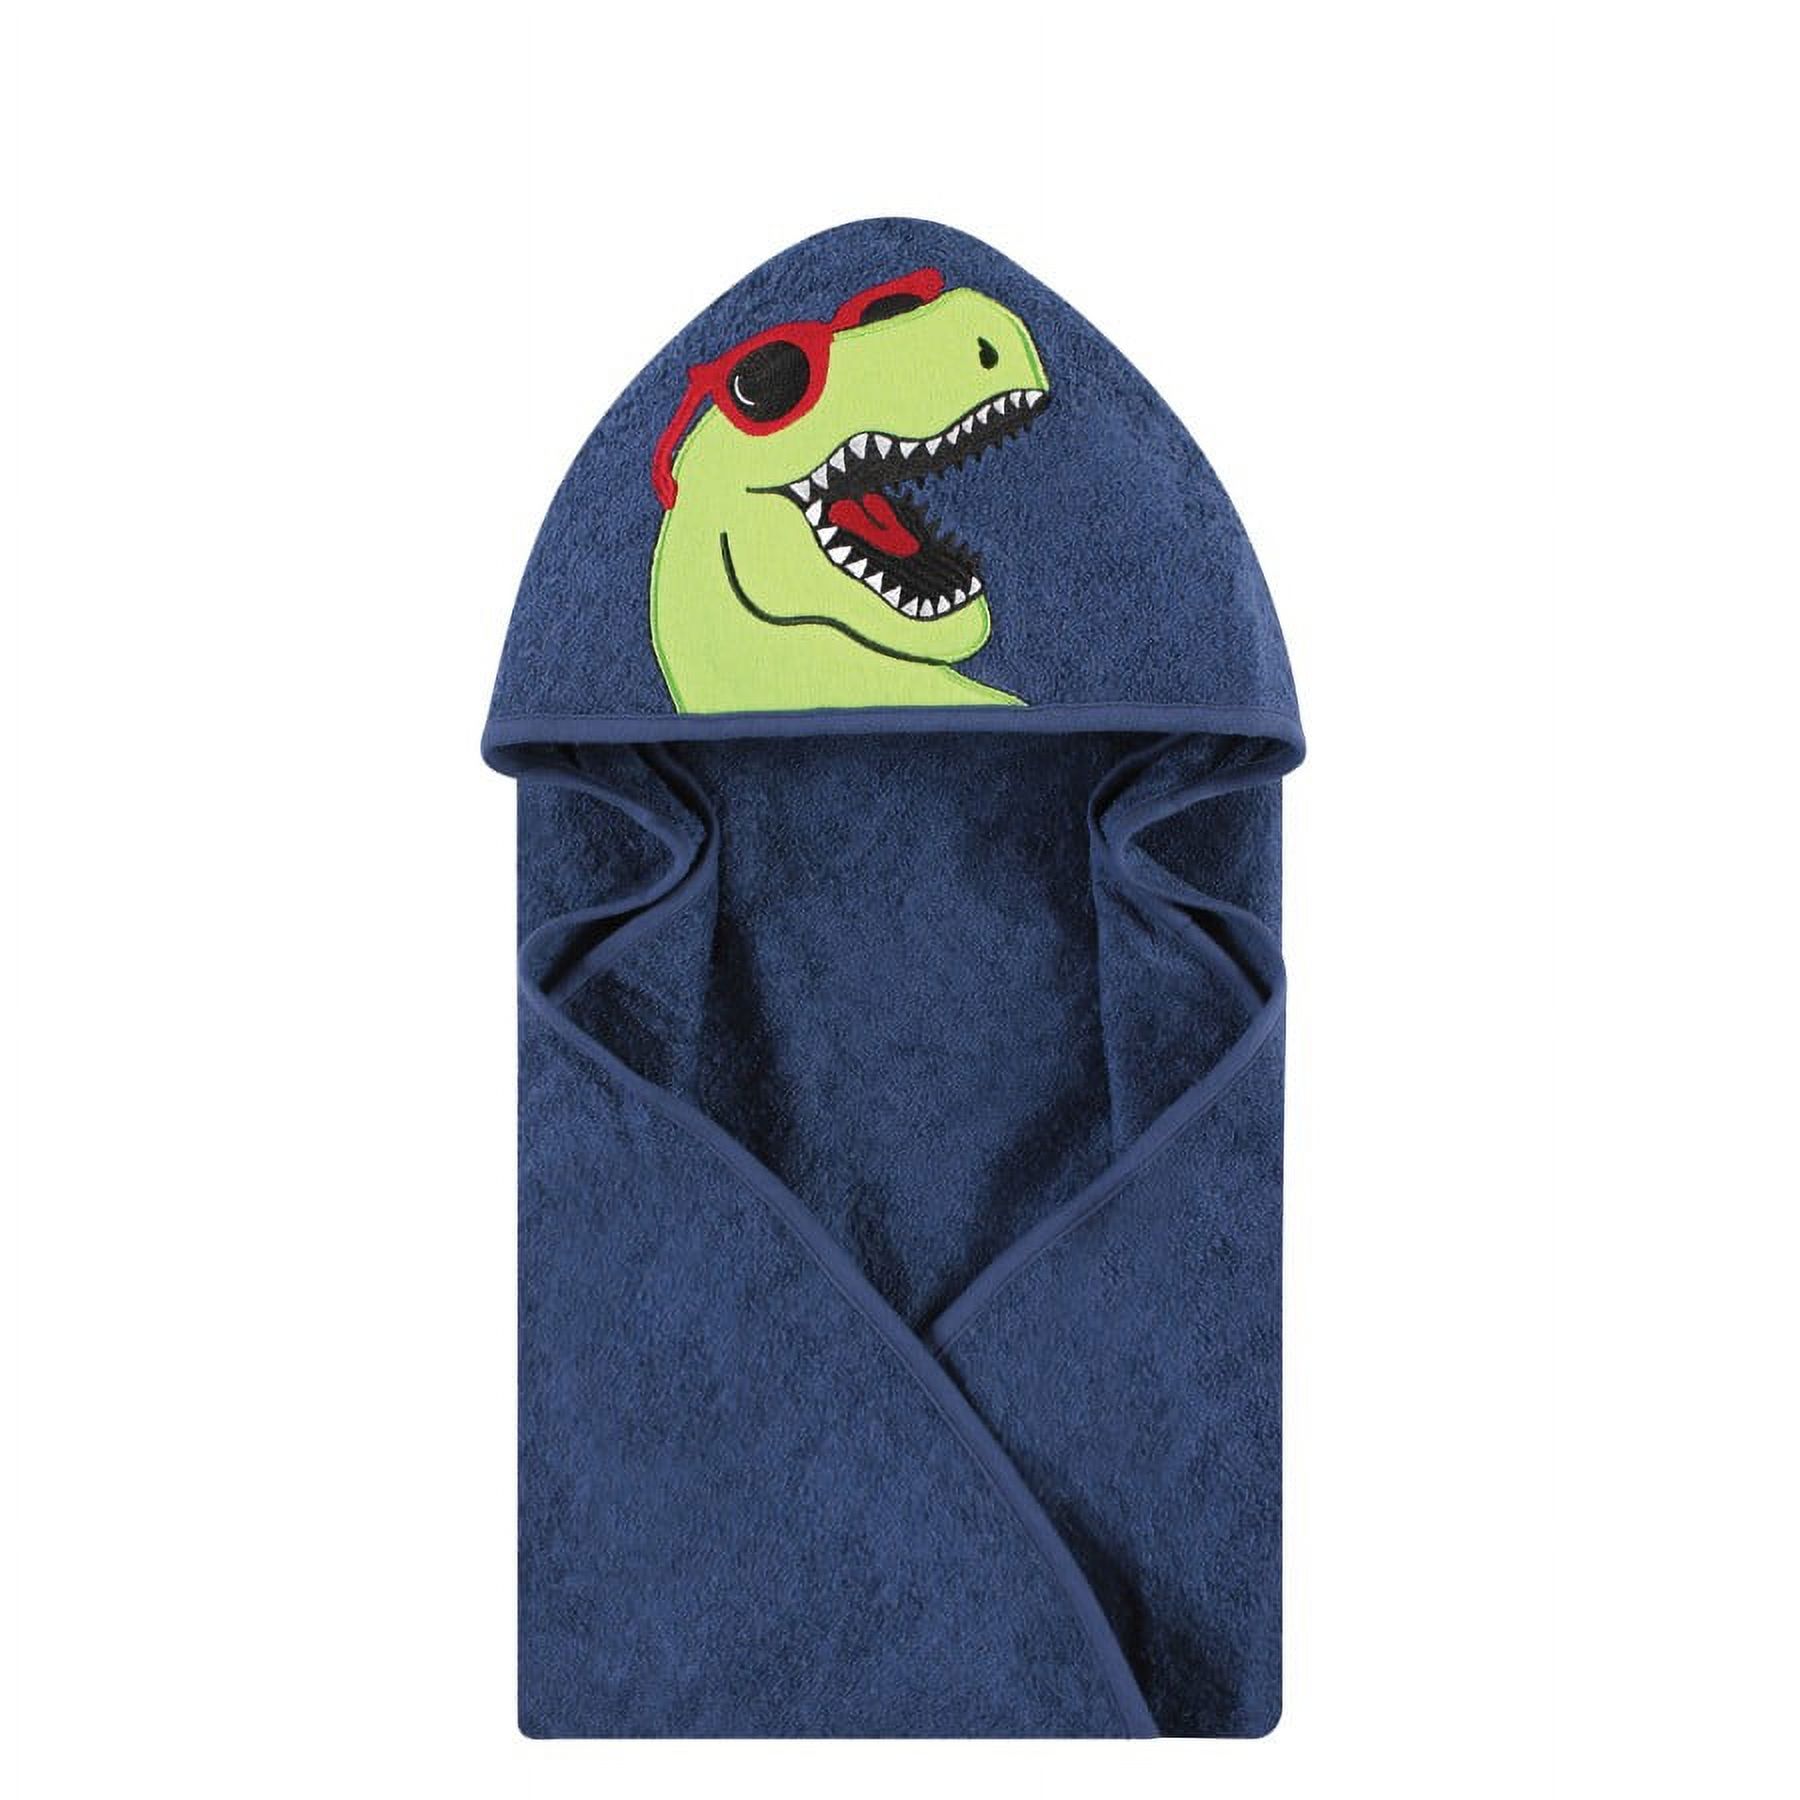 Hudson Baby Infant Boy Cotton Animal Face Hooded Towel, Cool Dino, One Size - image 1 of 2